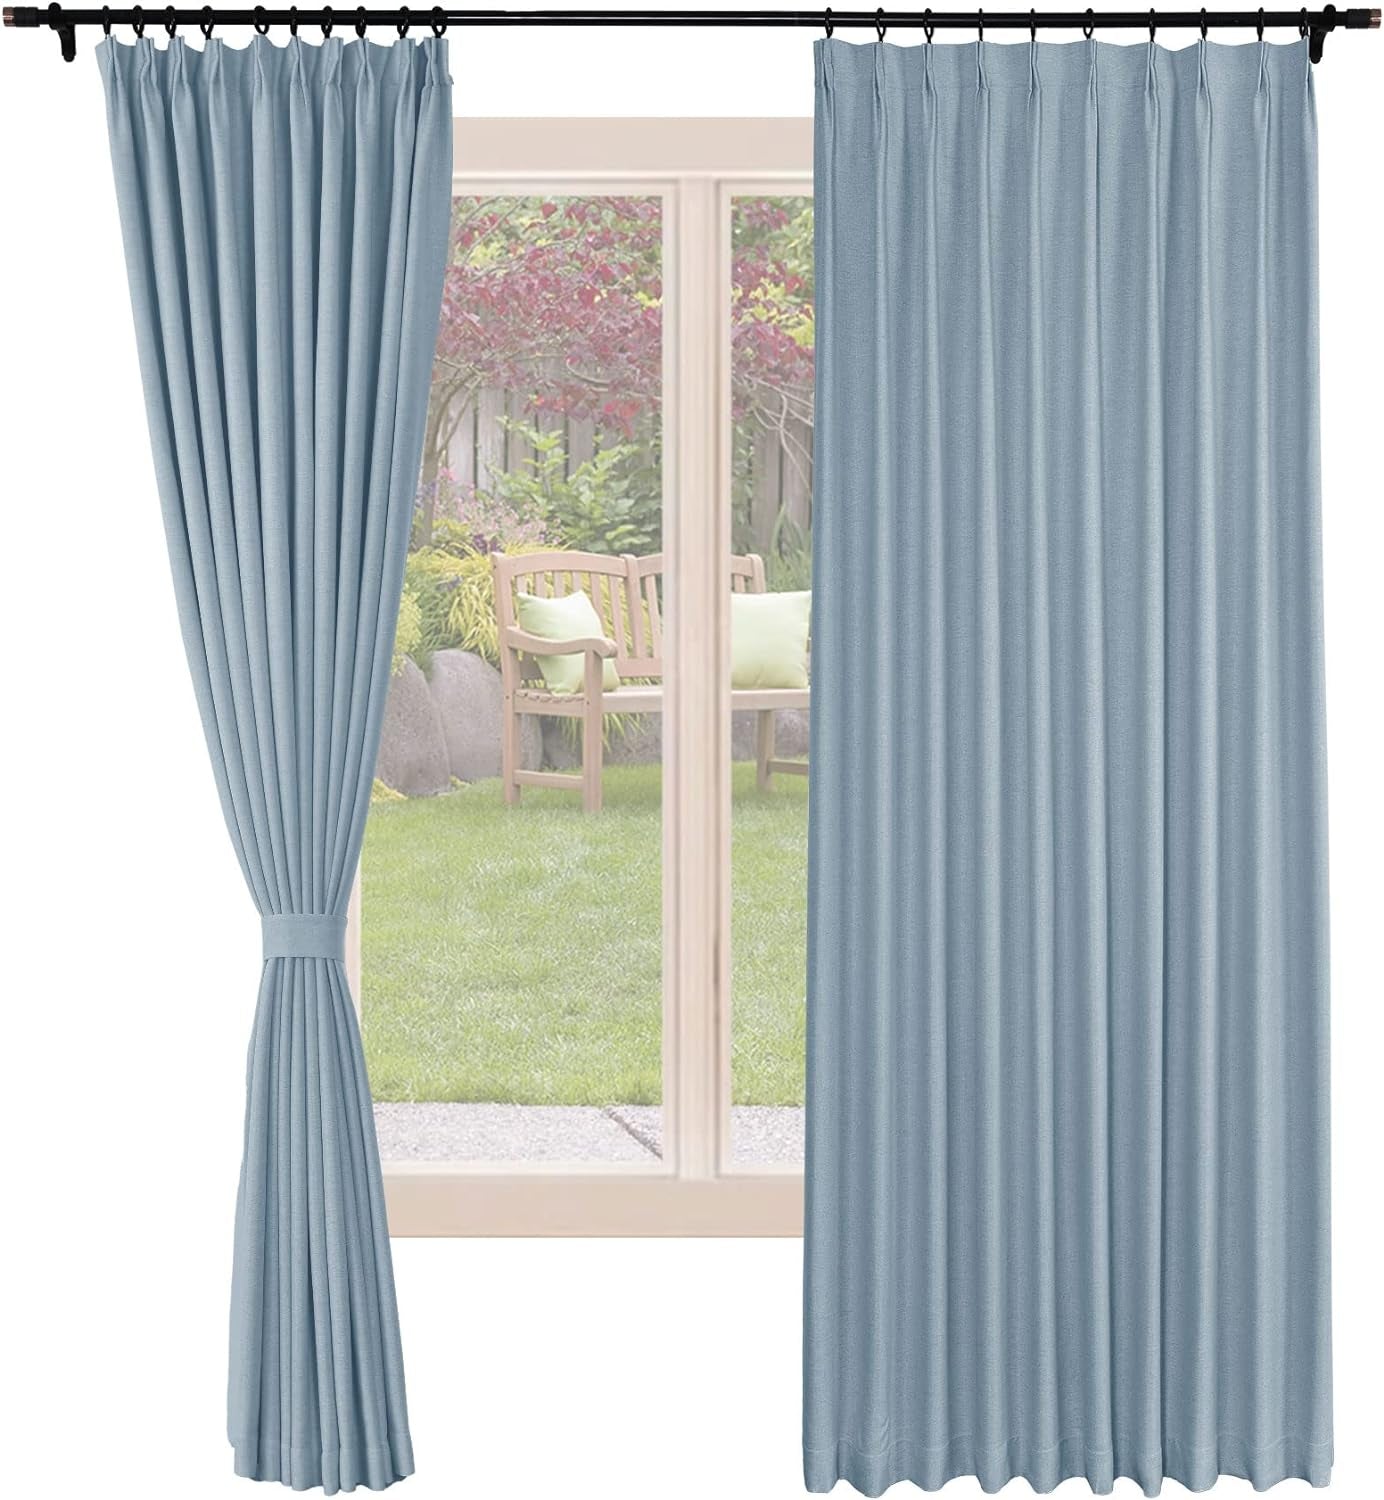 Frelement Blackout Curtains Natural Linen Curtains Pinch Pleat Drapery Panels for Living Room Thermal Insulated Curtains, 52" W X 63" L, 2 Panels, Oasis  Frelement 19 Cloisoone (100Wx84L Inch)*2 